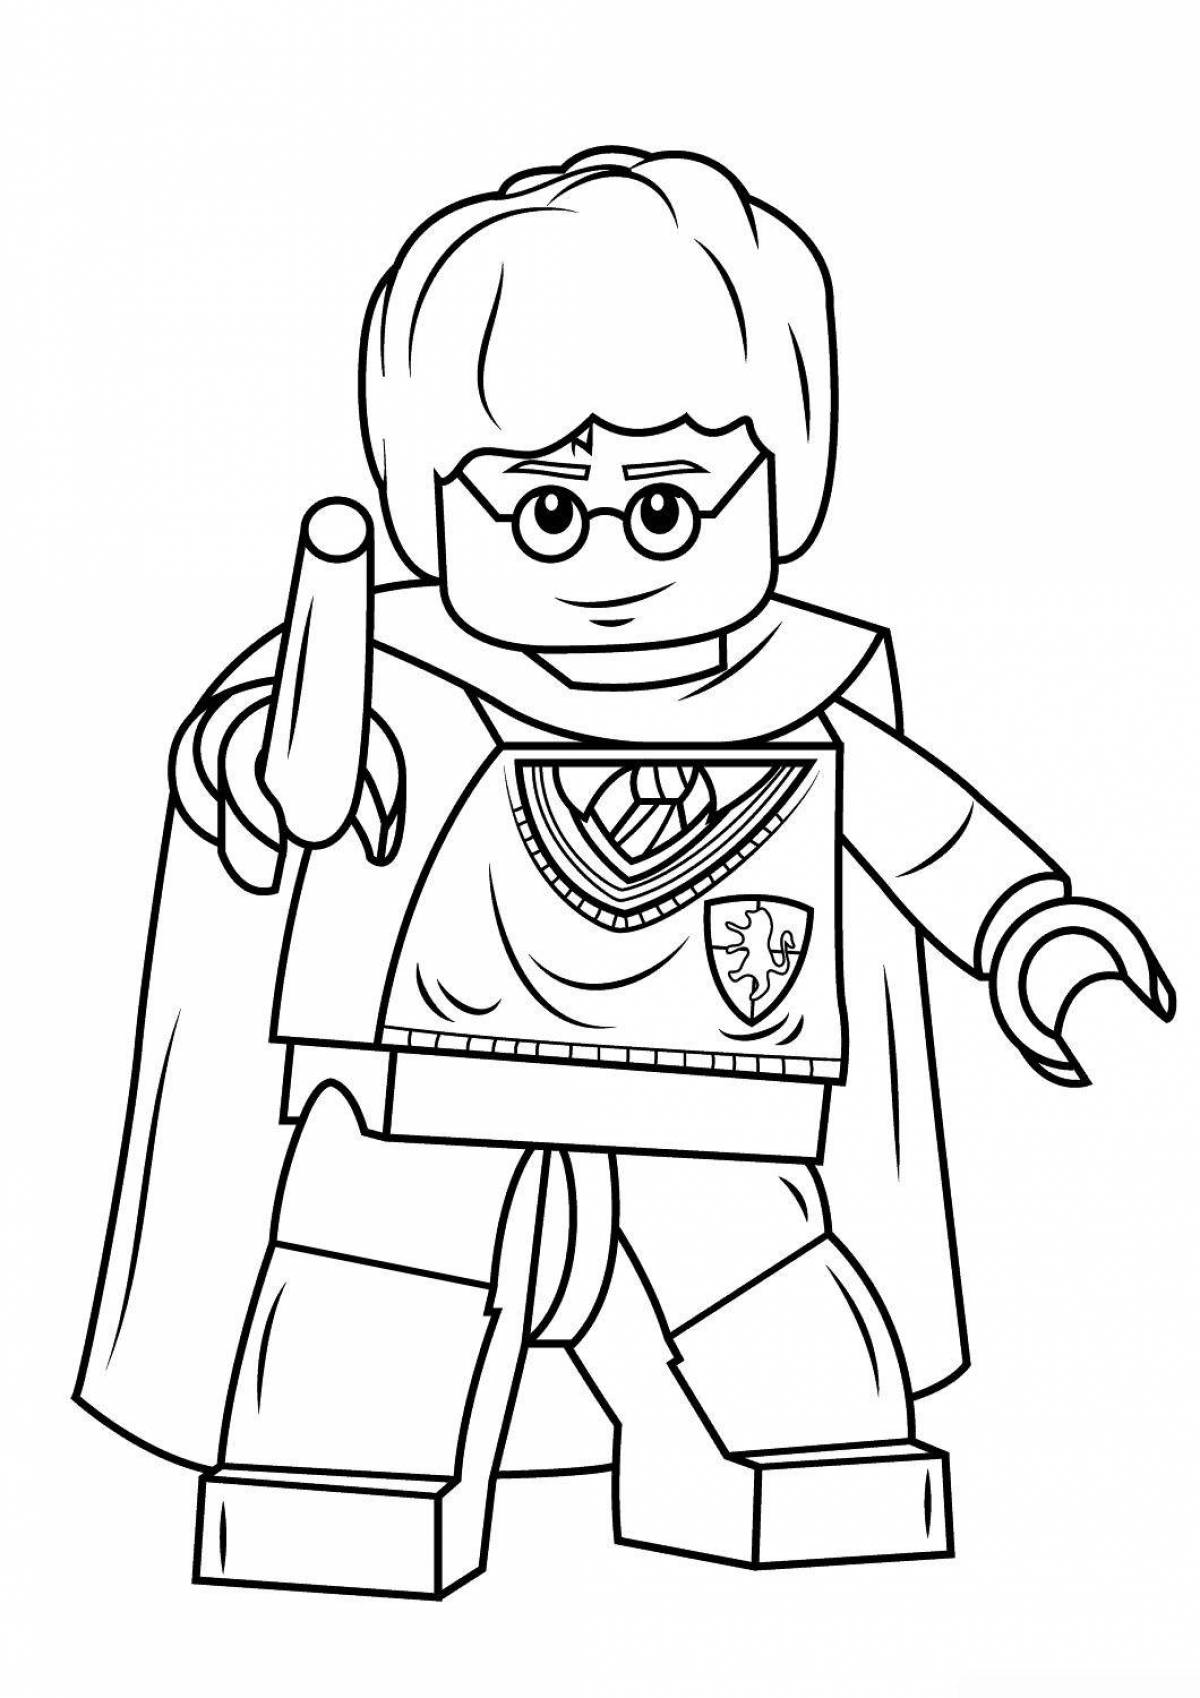 Coloring bright Lego figures